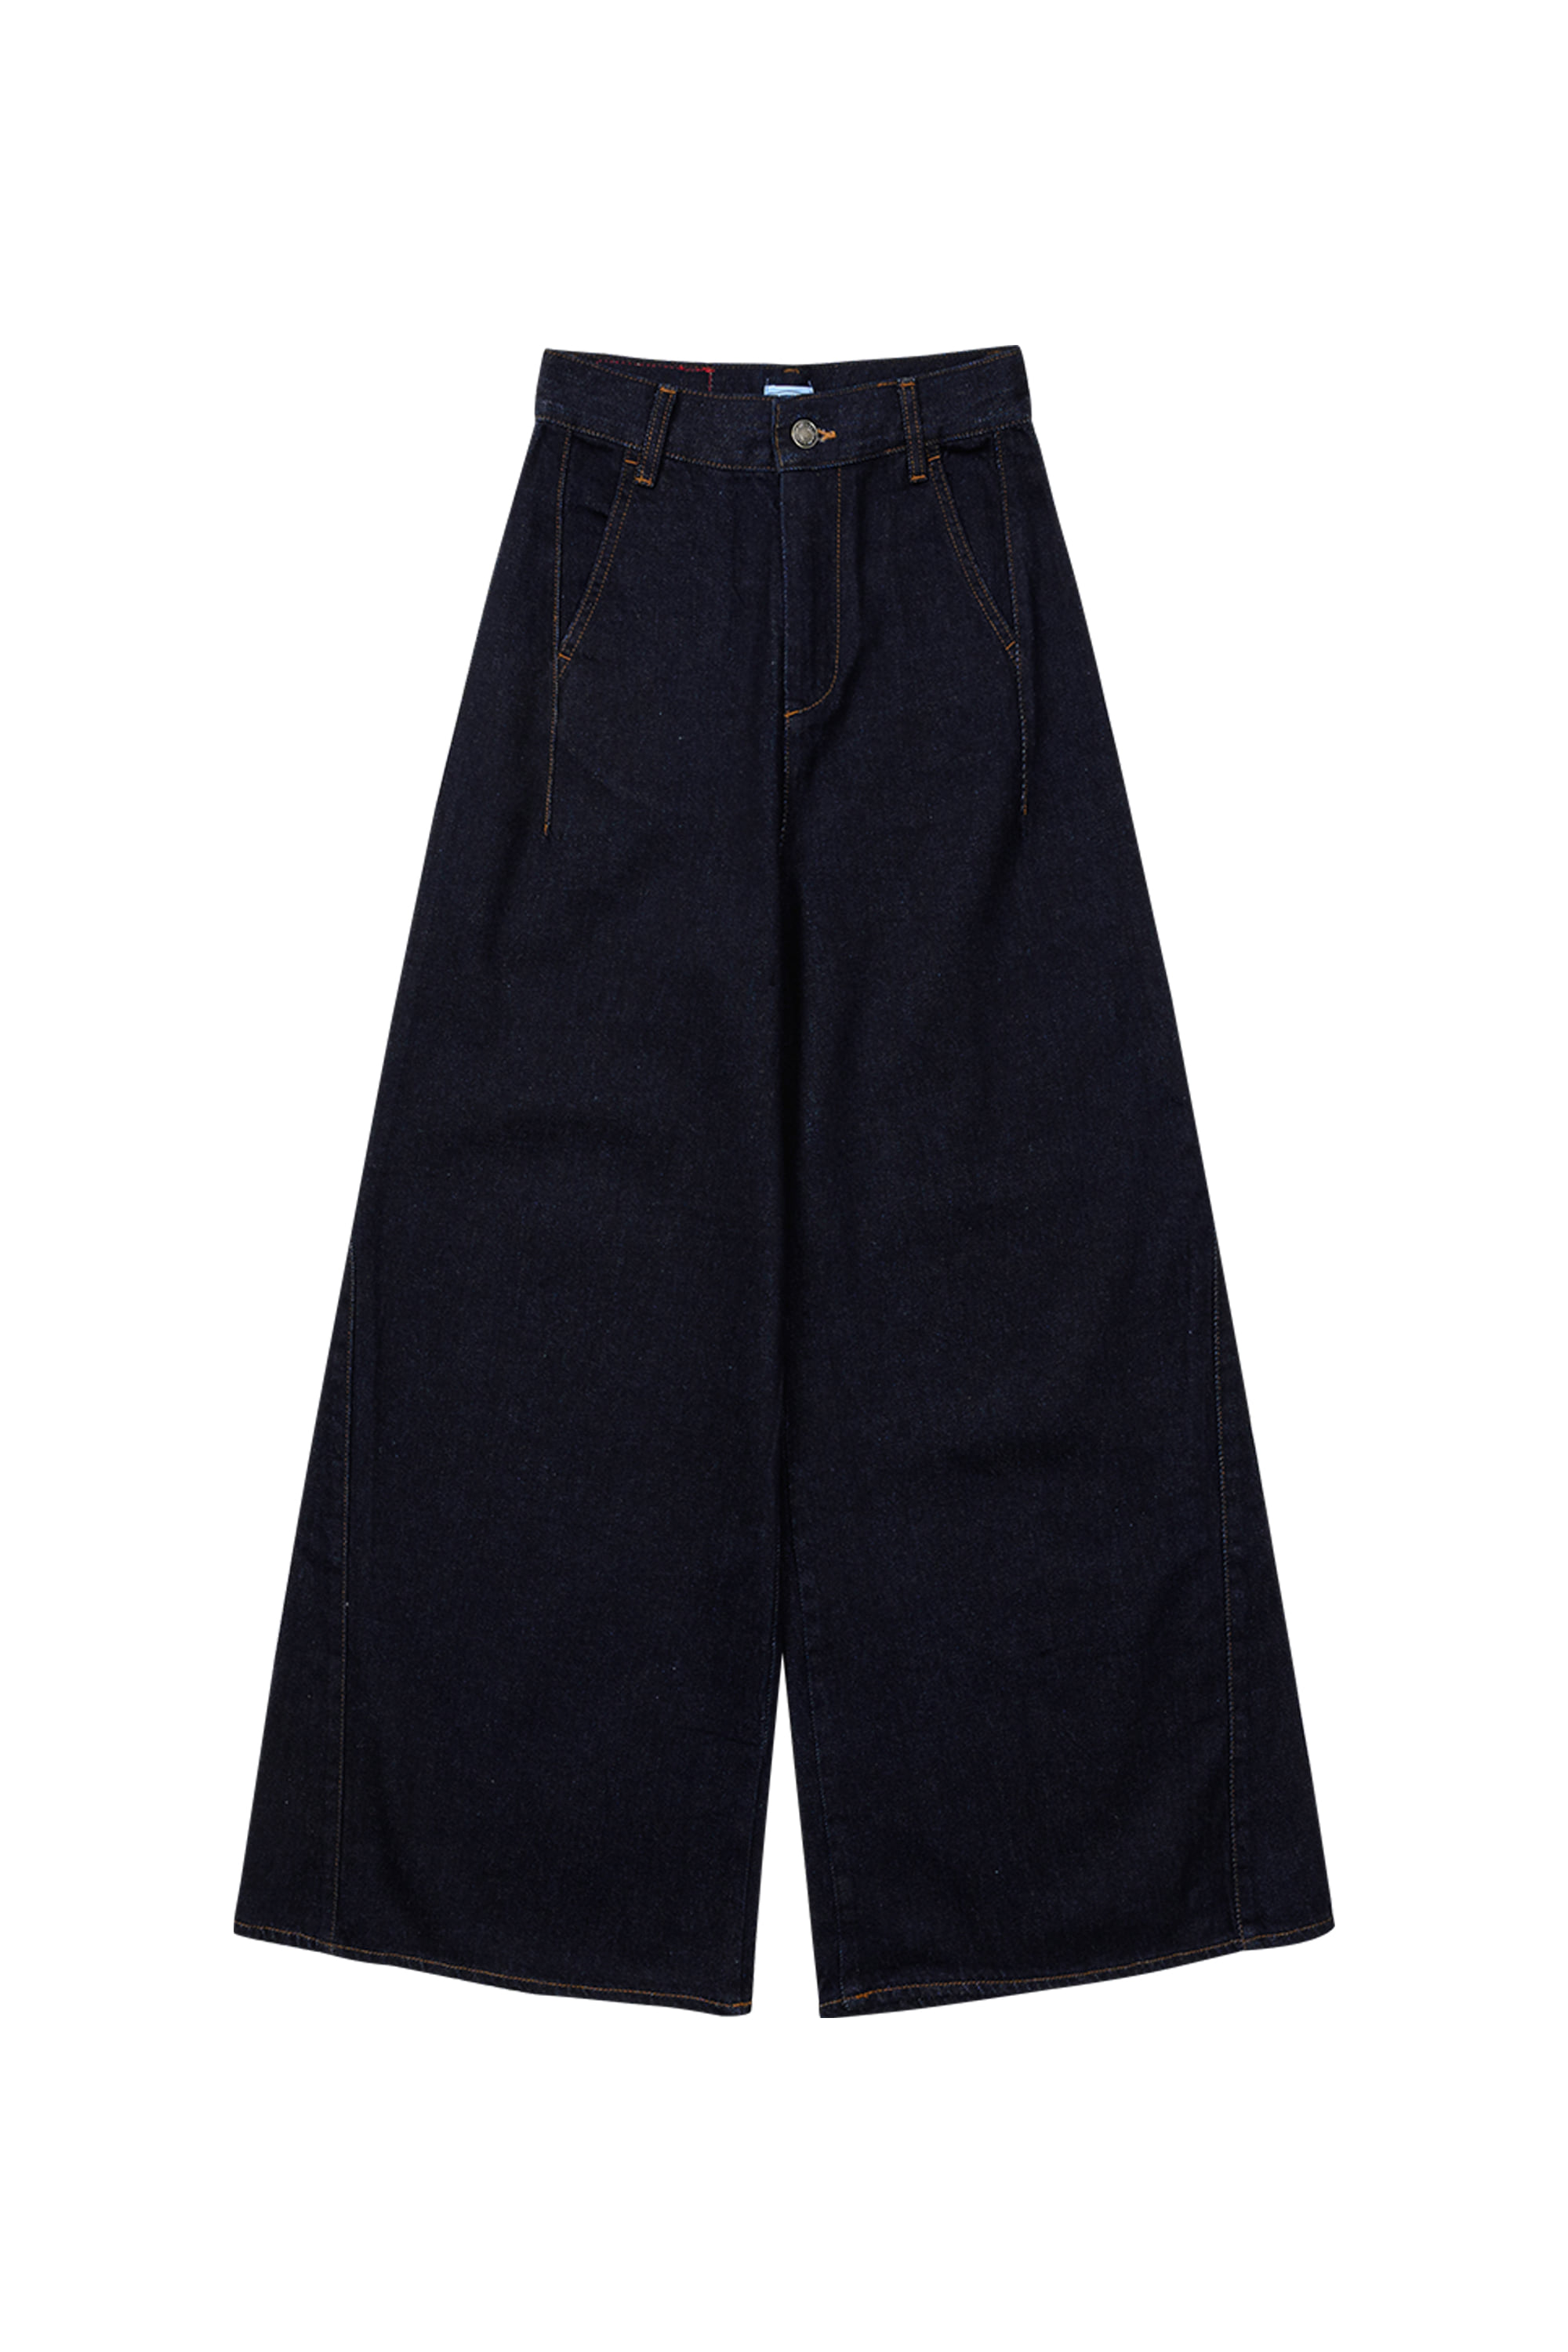 MONRO WIDE FLARE JEANS